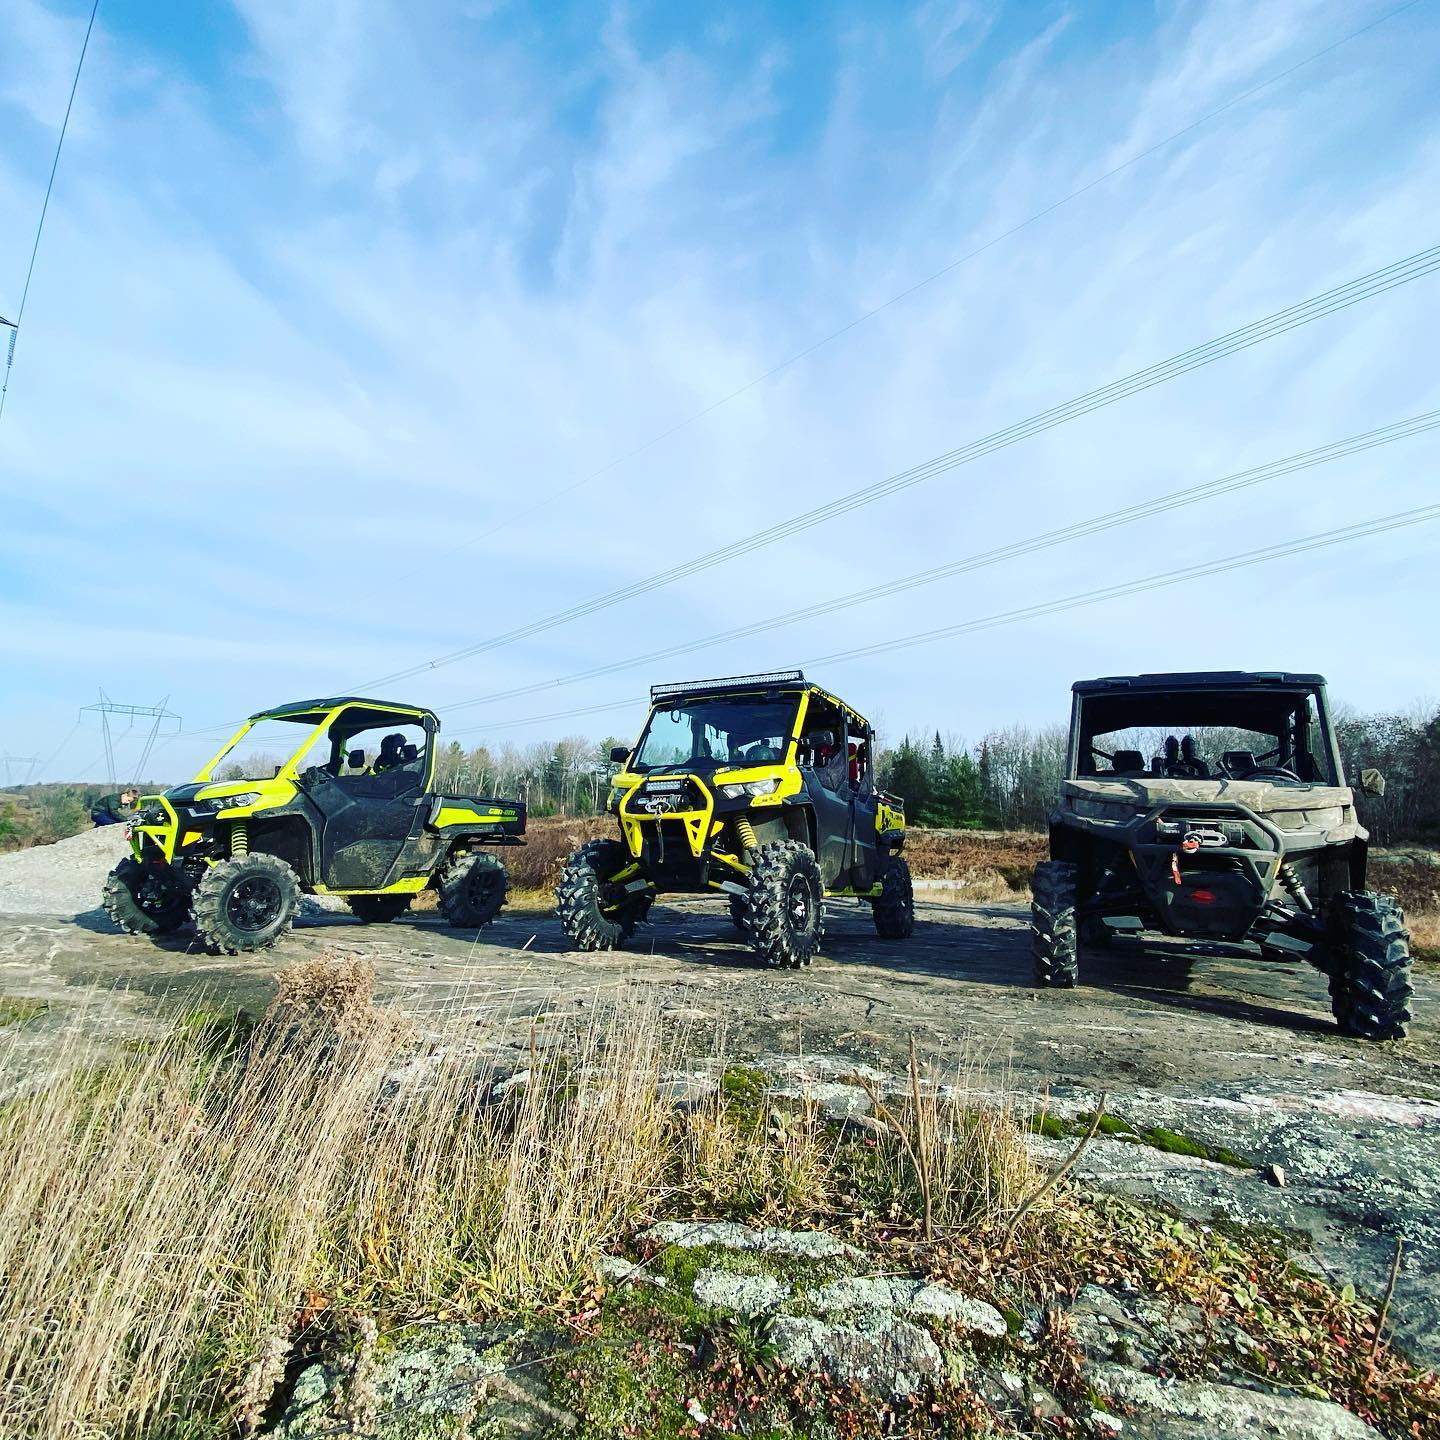 And then there were 3 #defendermaxxmr #swampdonkeys